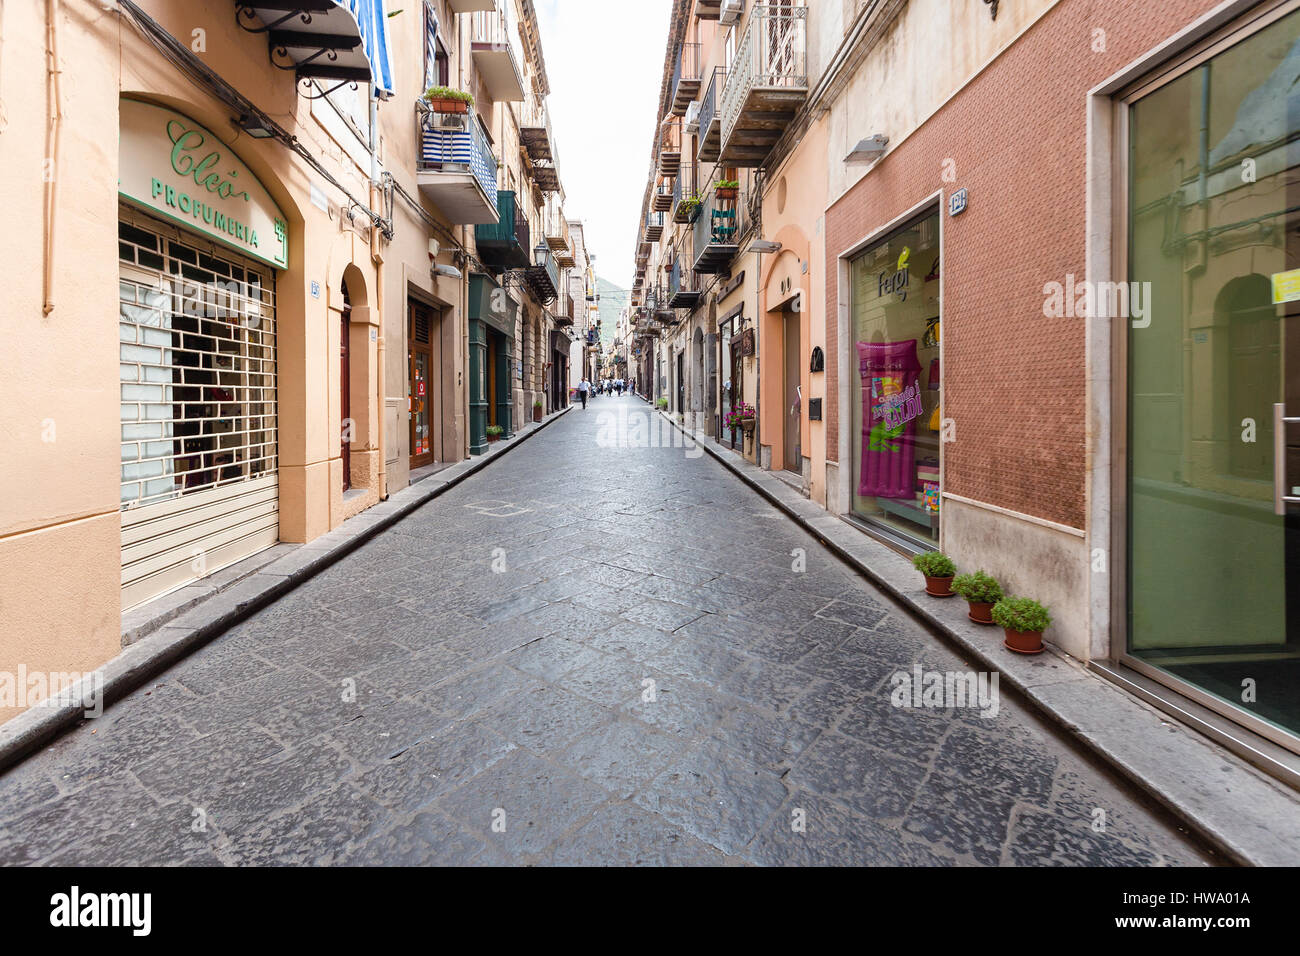 CEFALU, ITALY - JUNE 25, 2011: Corso Ruggero street in Cefalu in Sicily. The town is one of the major tourist attractions in the Palermo - Messina reg Stock Photo